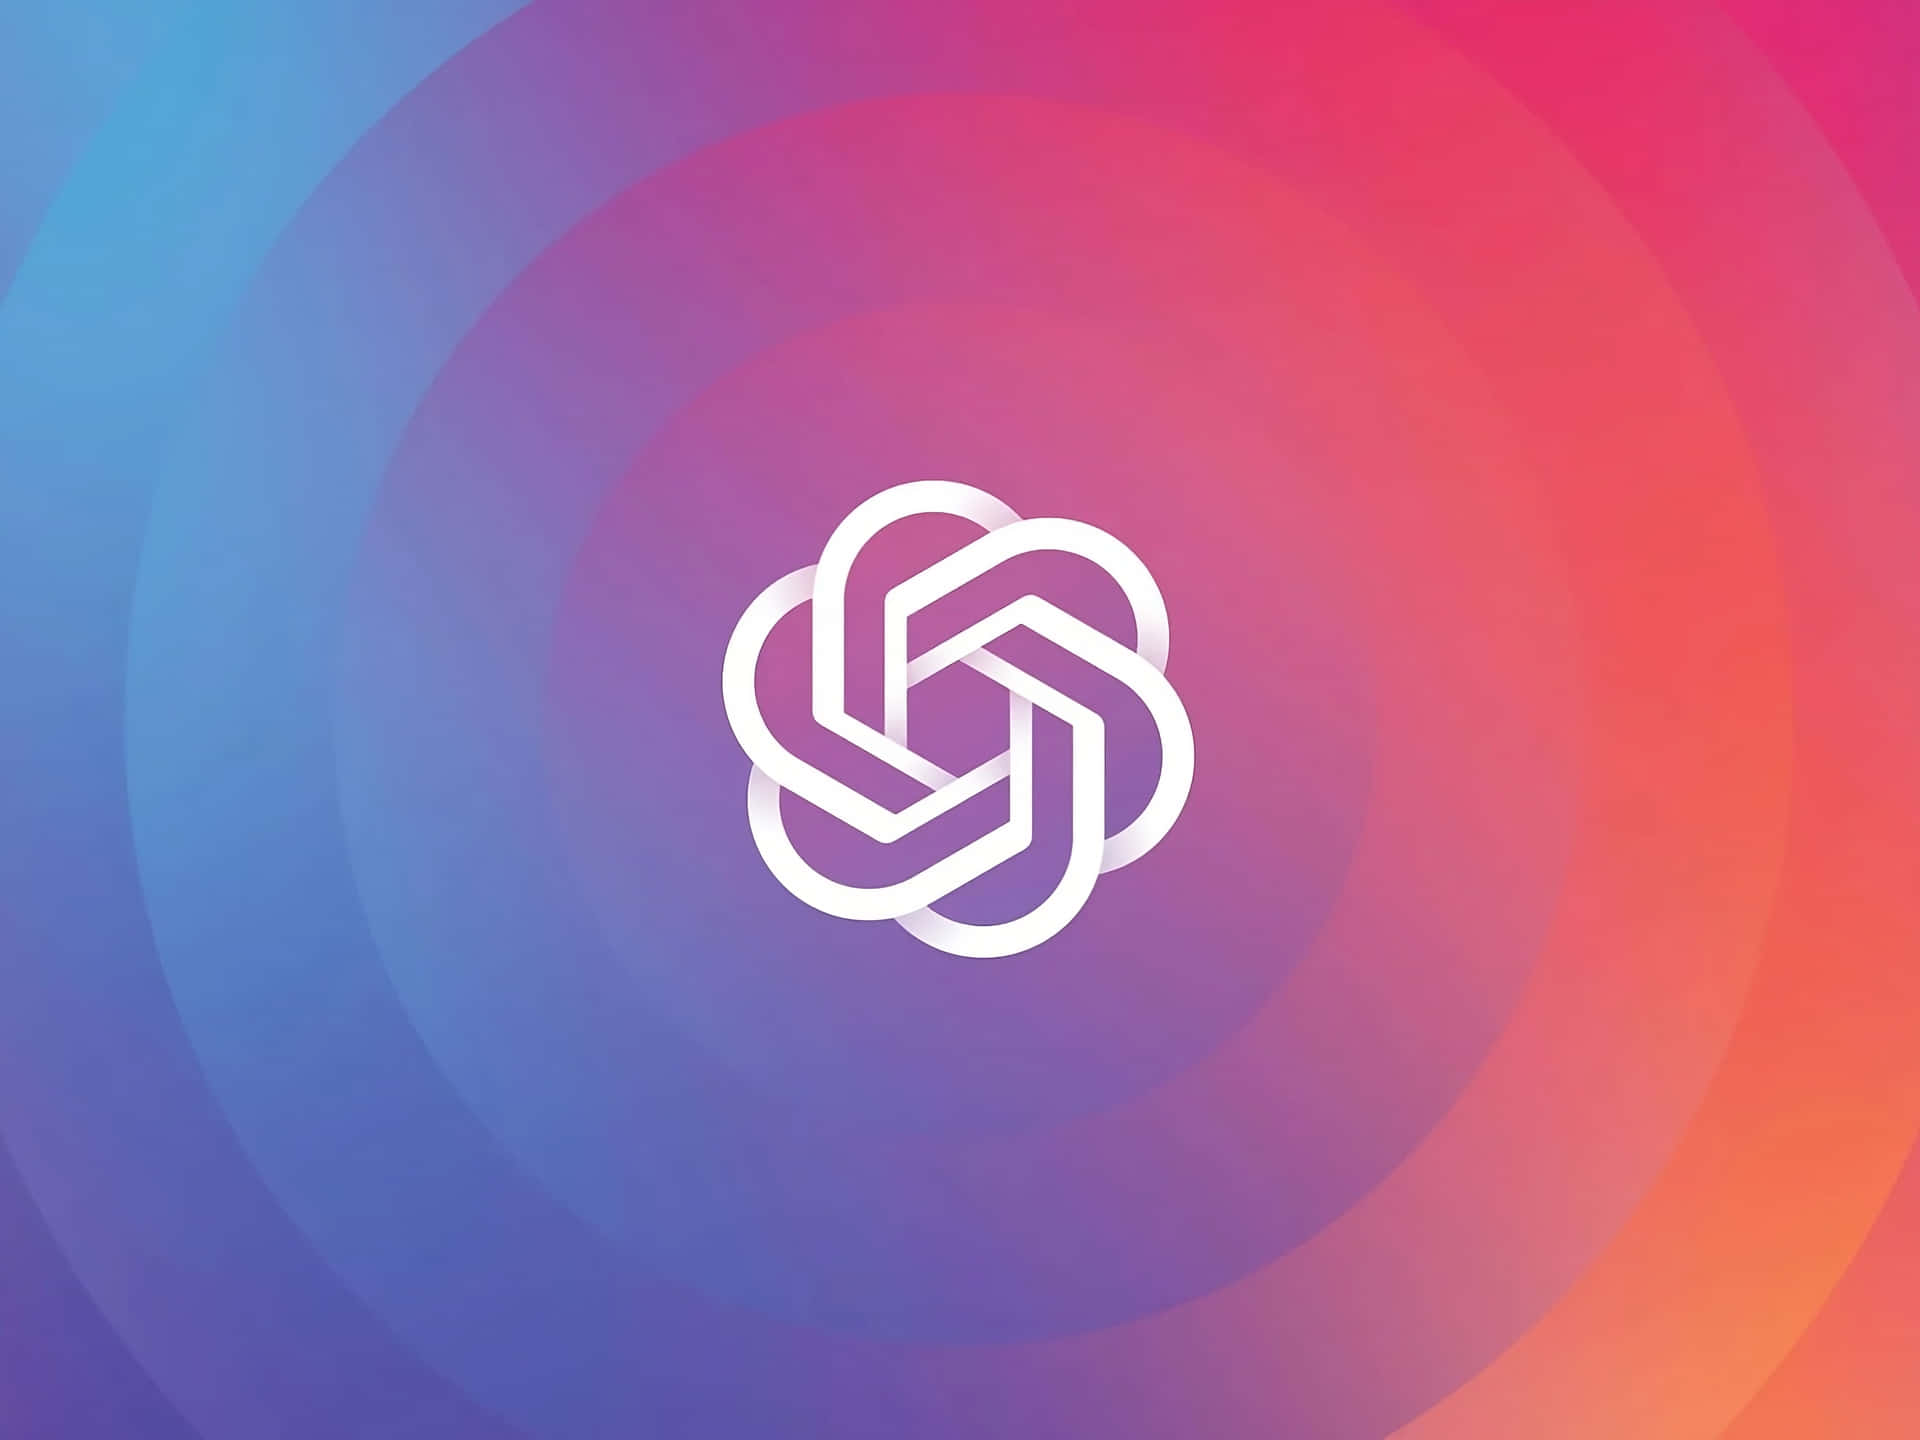 A Colorful Background With A Knot Logo Wallpaper